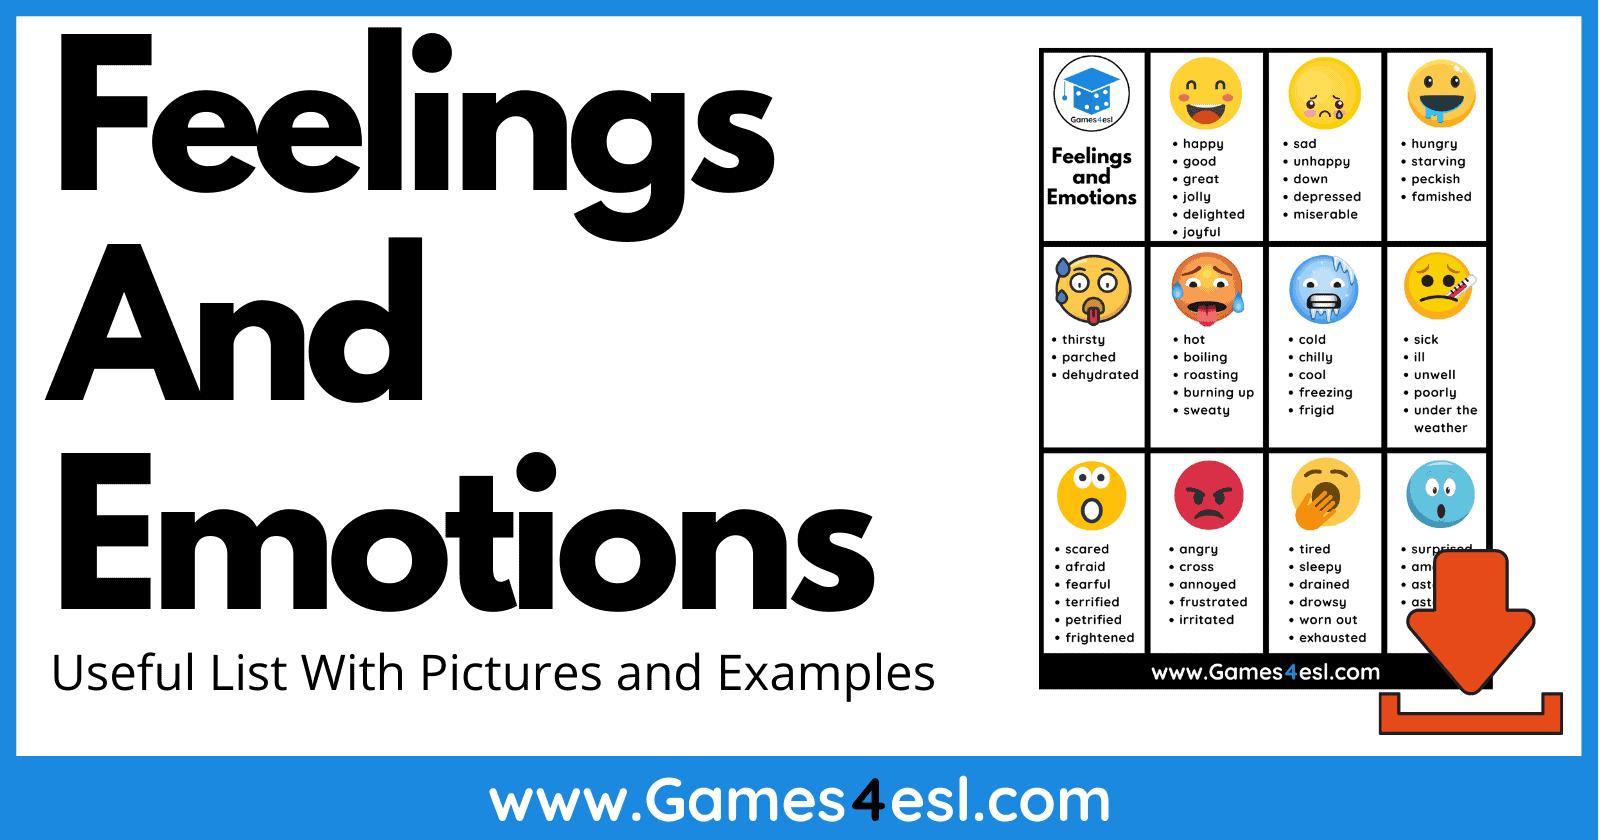 useful-list-of-feelings-and-emotions-in-english-games4esl